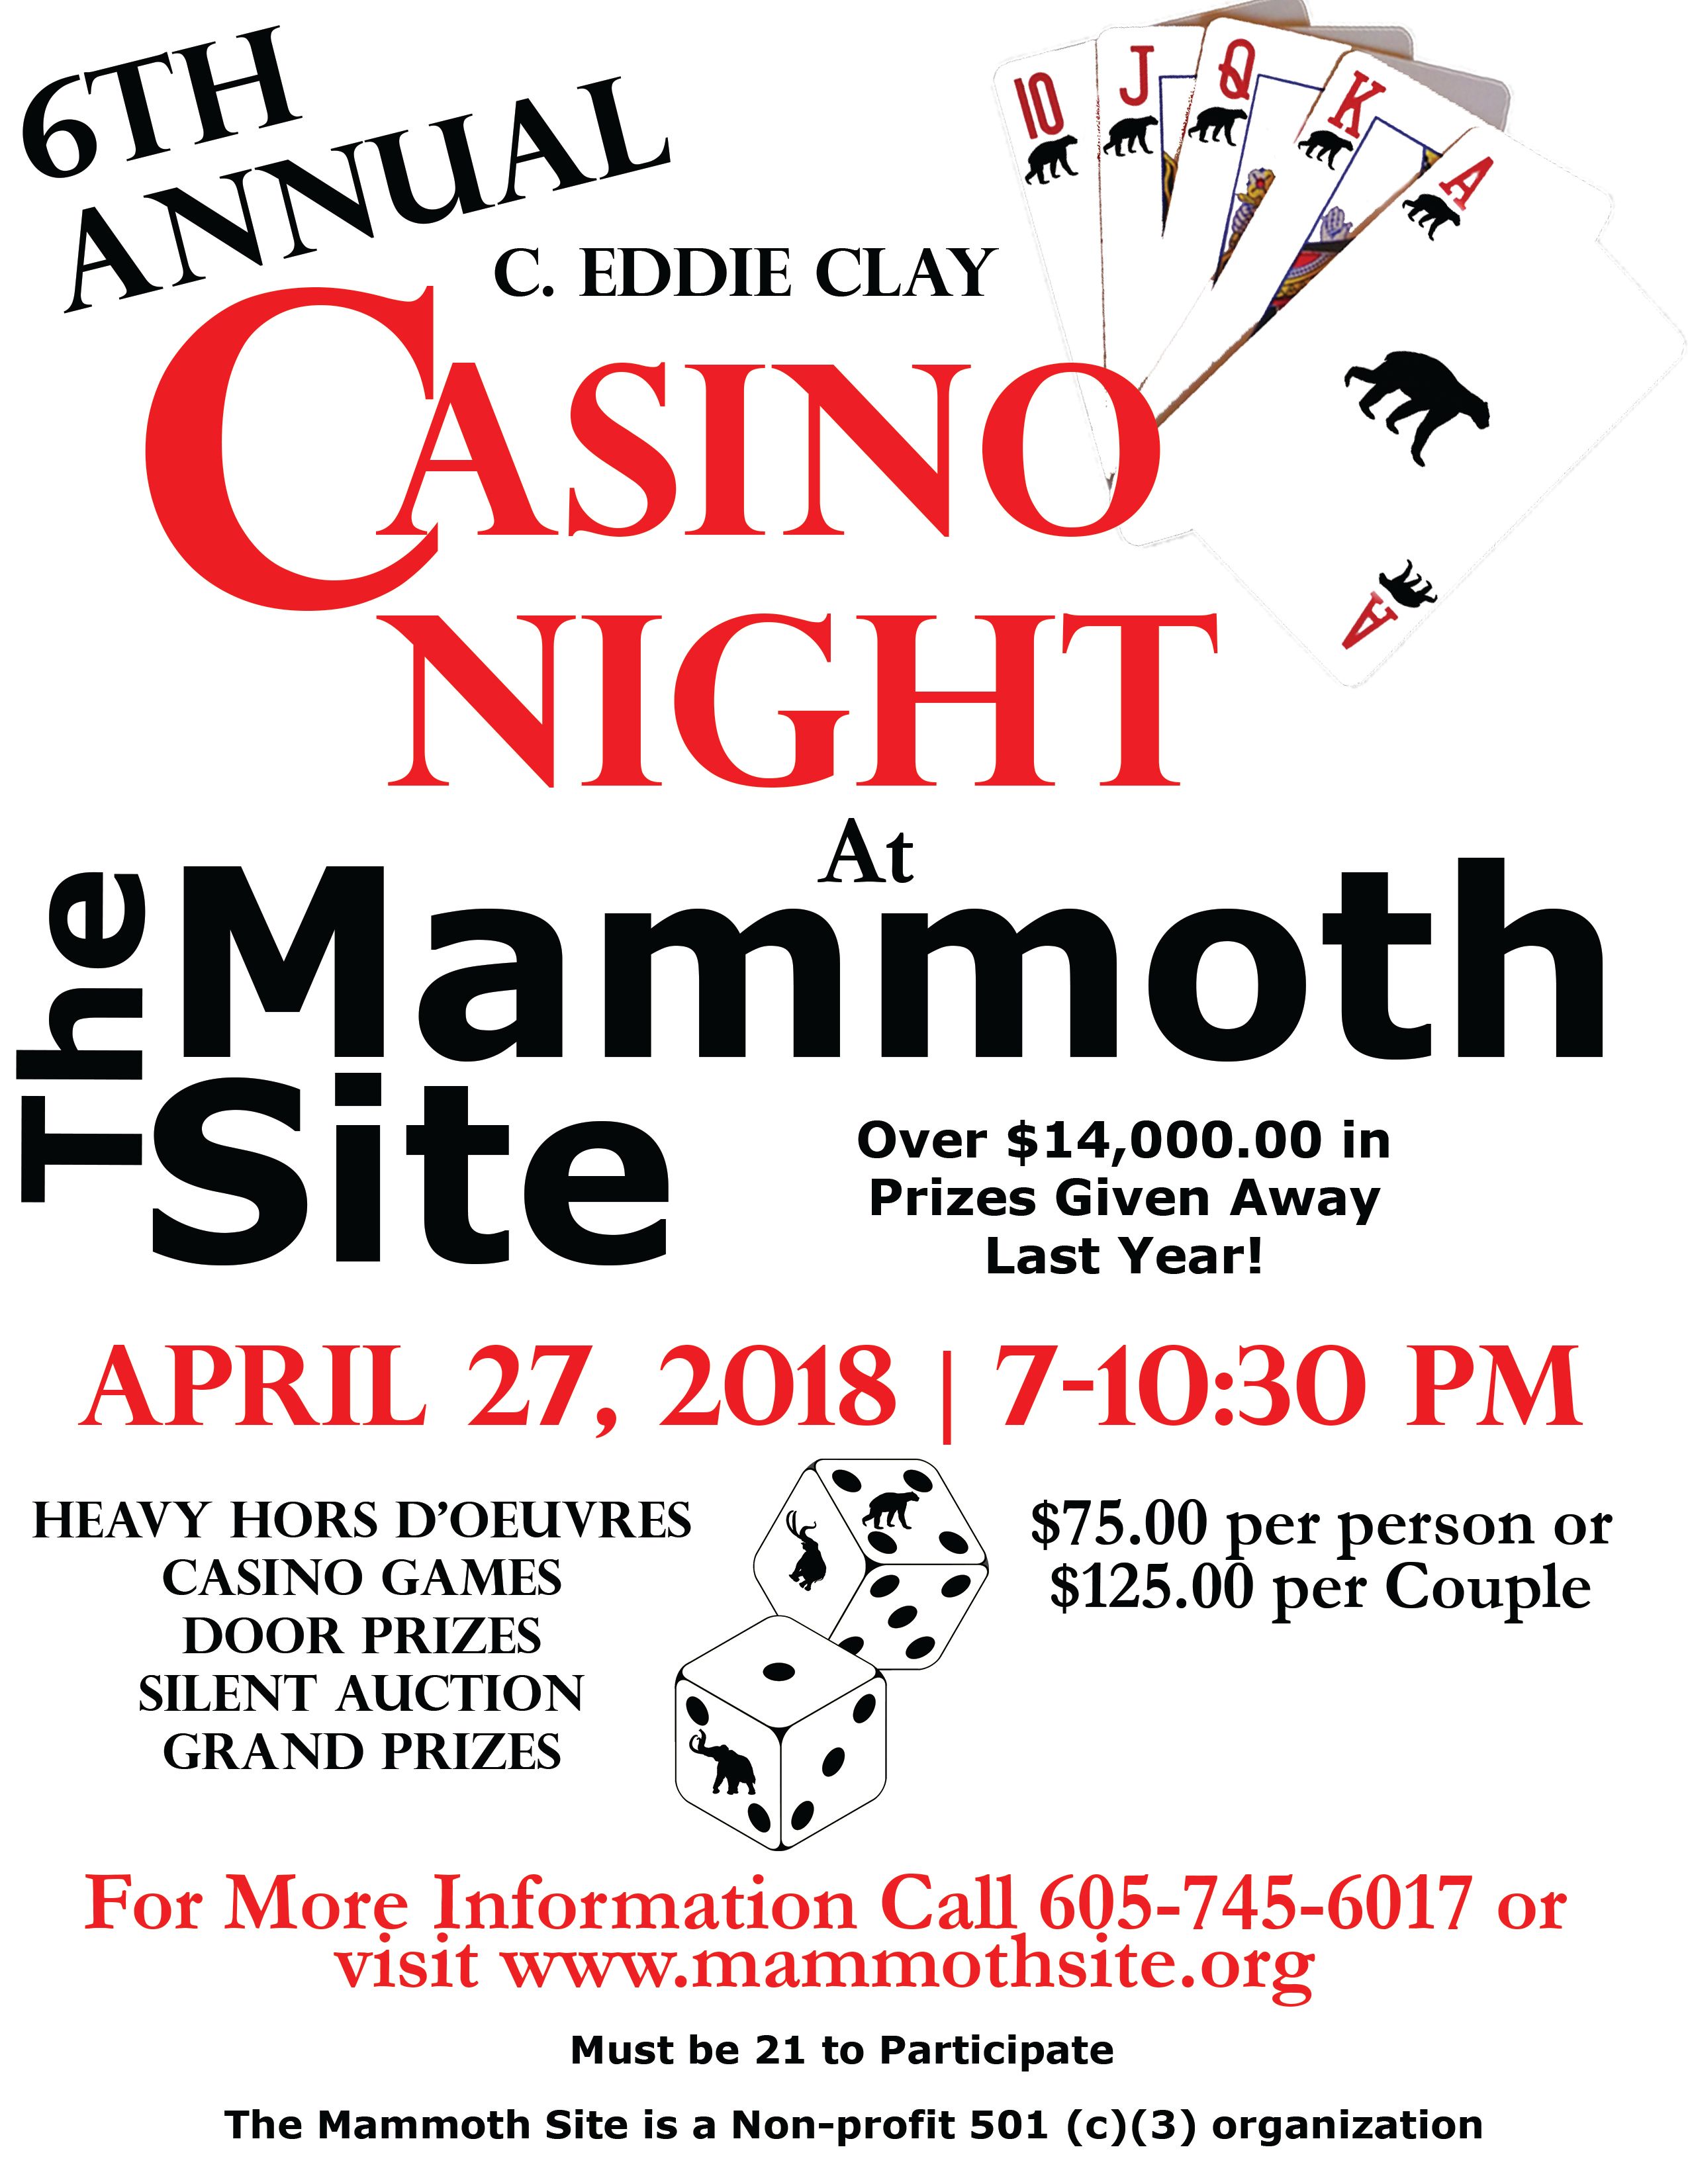 6th Annual Eddie Clay Legacy Casino Night at The Mammoth Site